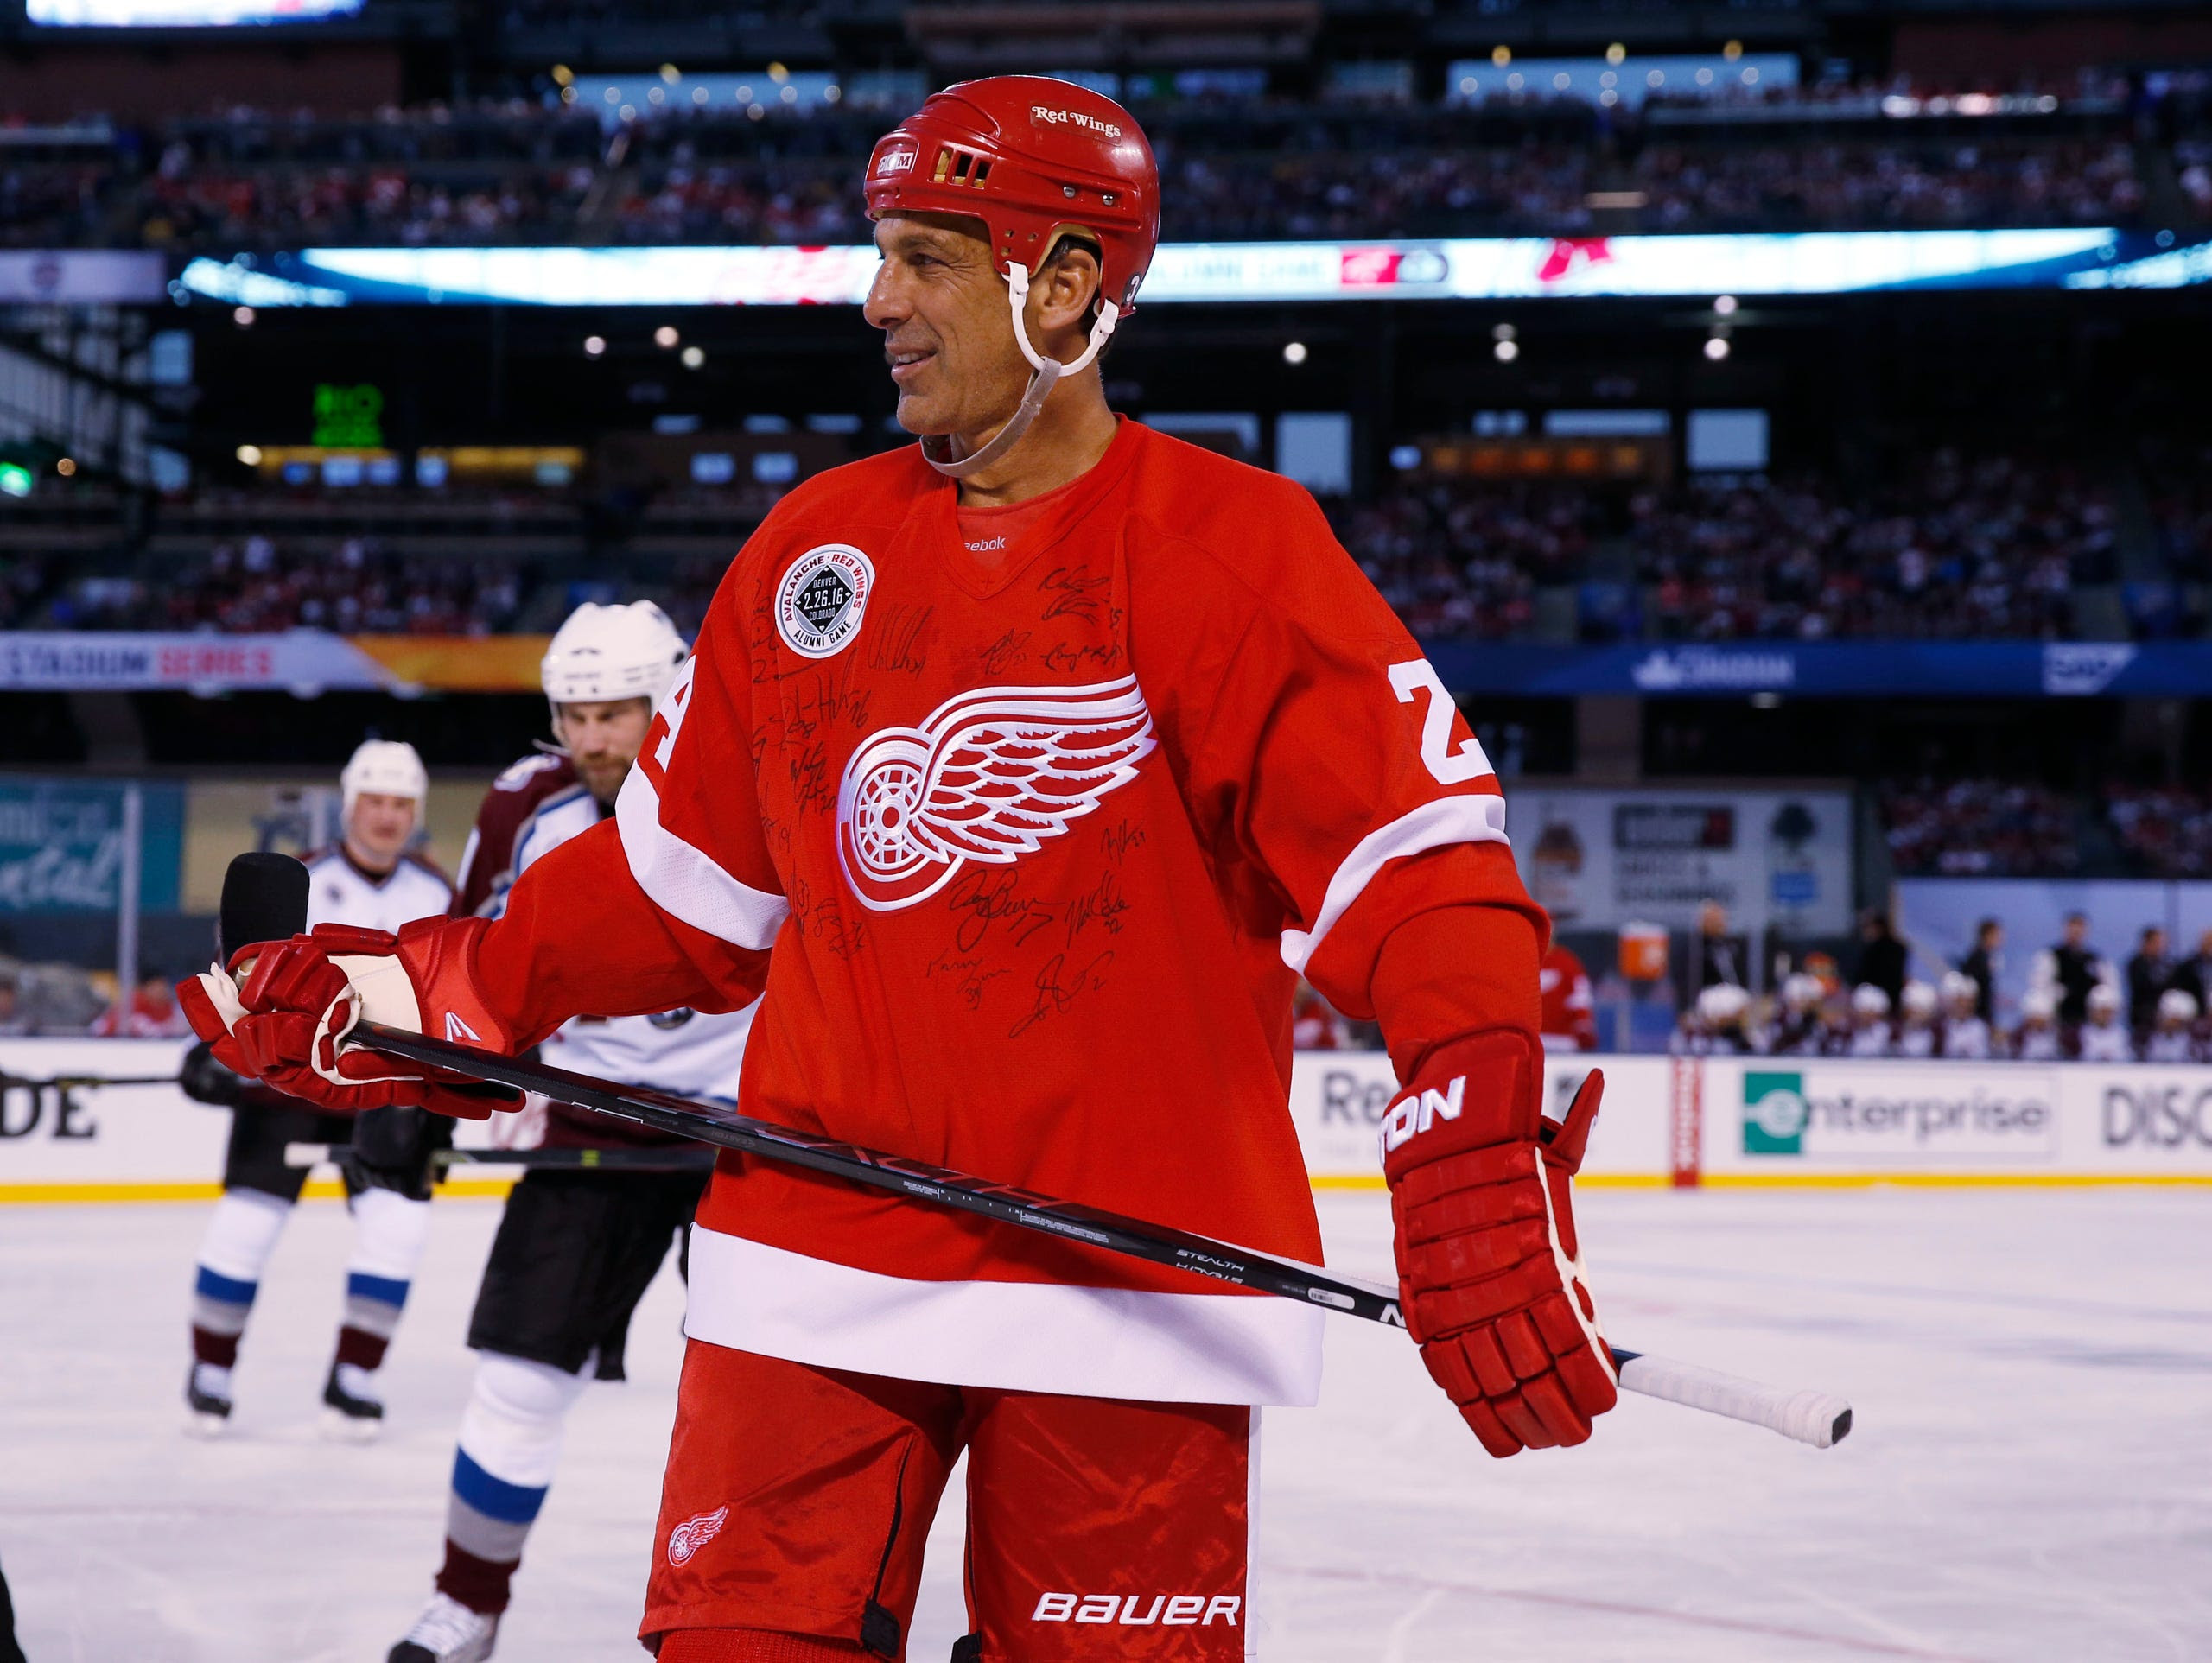 Detroit Red Wings defenseman Chris Chelios wears a sweater signed by teammates against the Colorado Avalanche at Coors Field in Denver on Feb. 26, 2016.